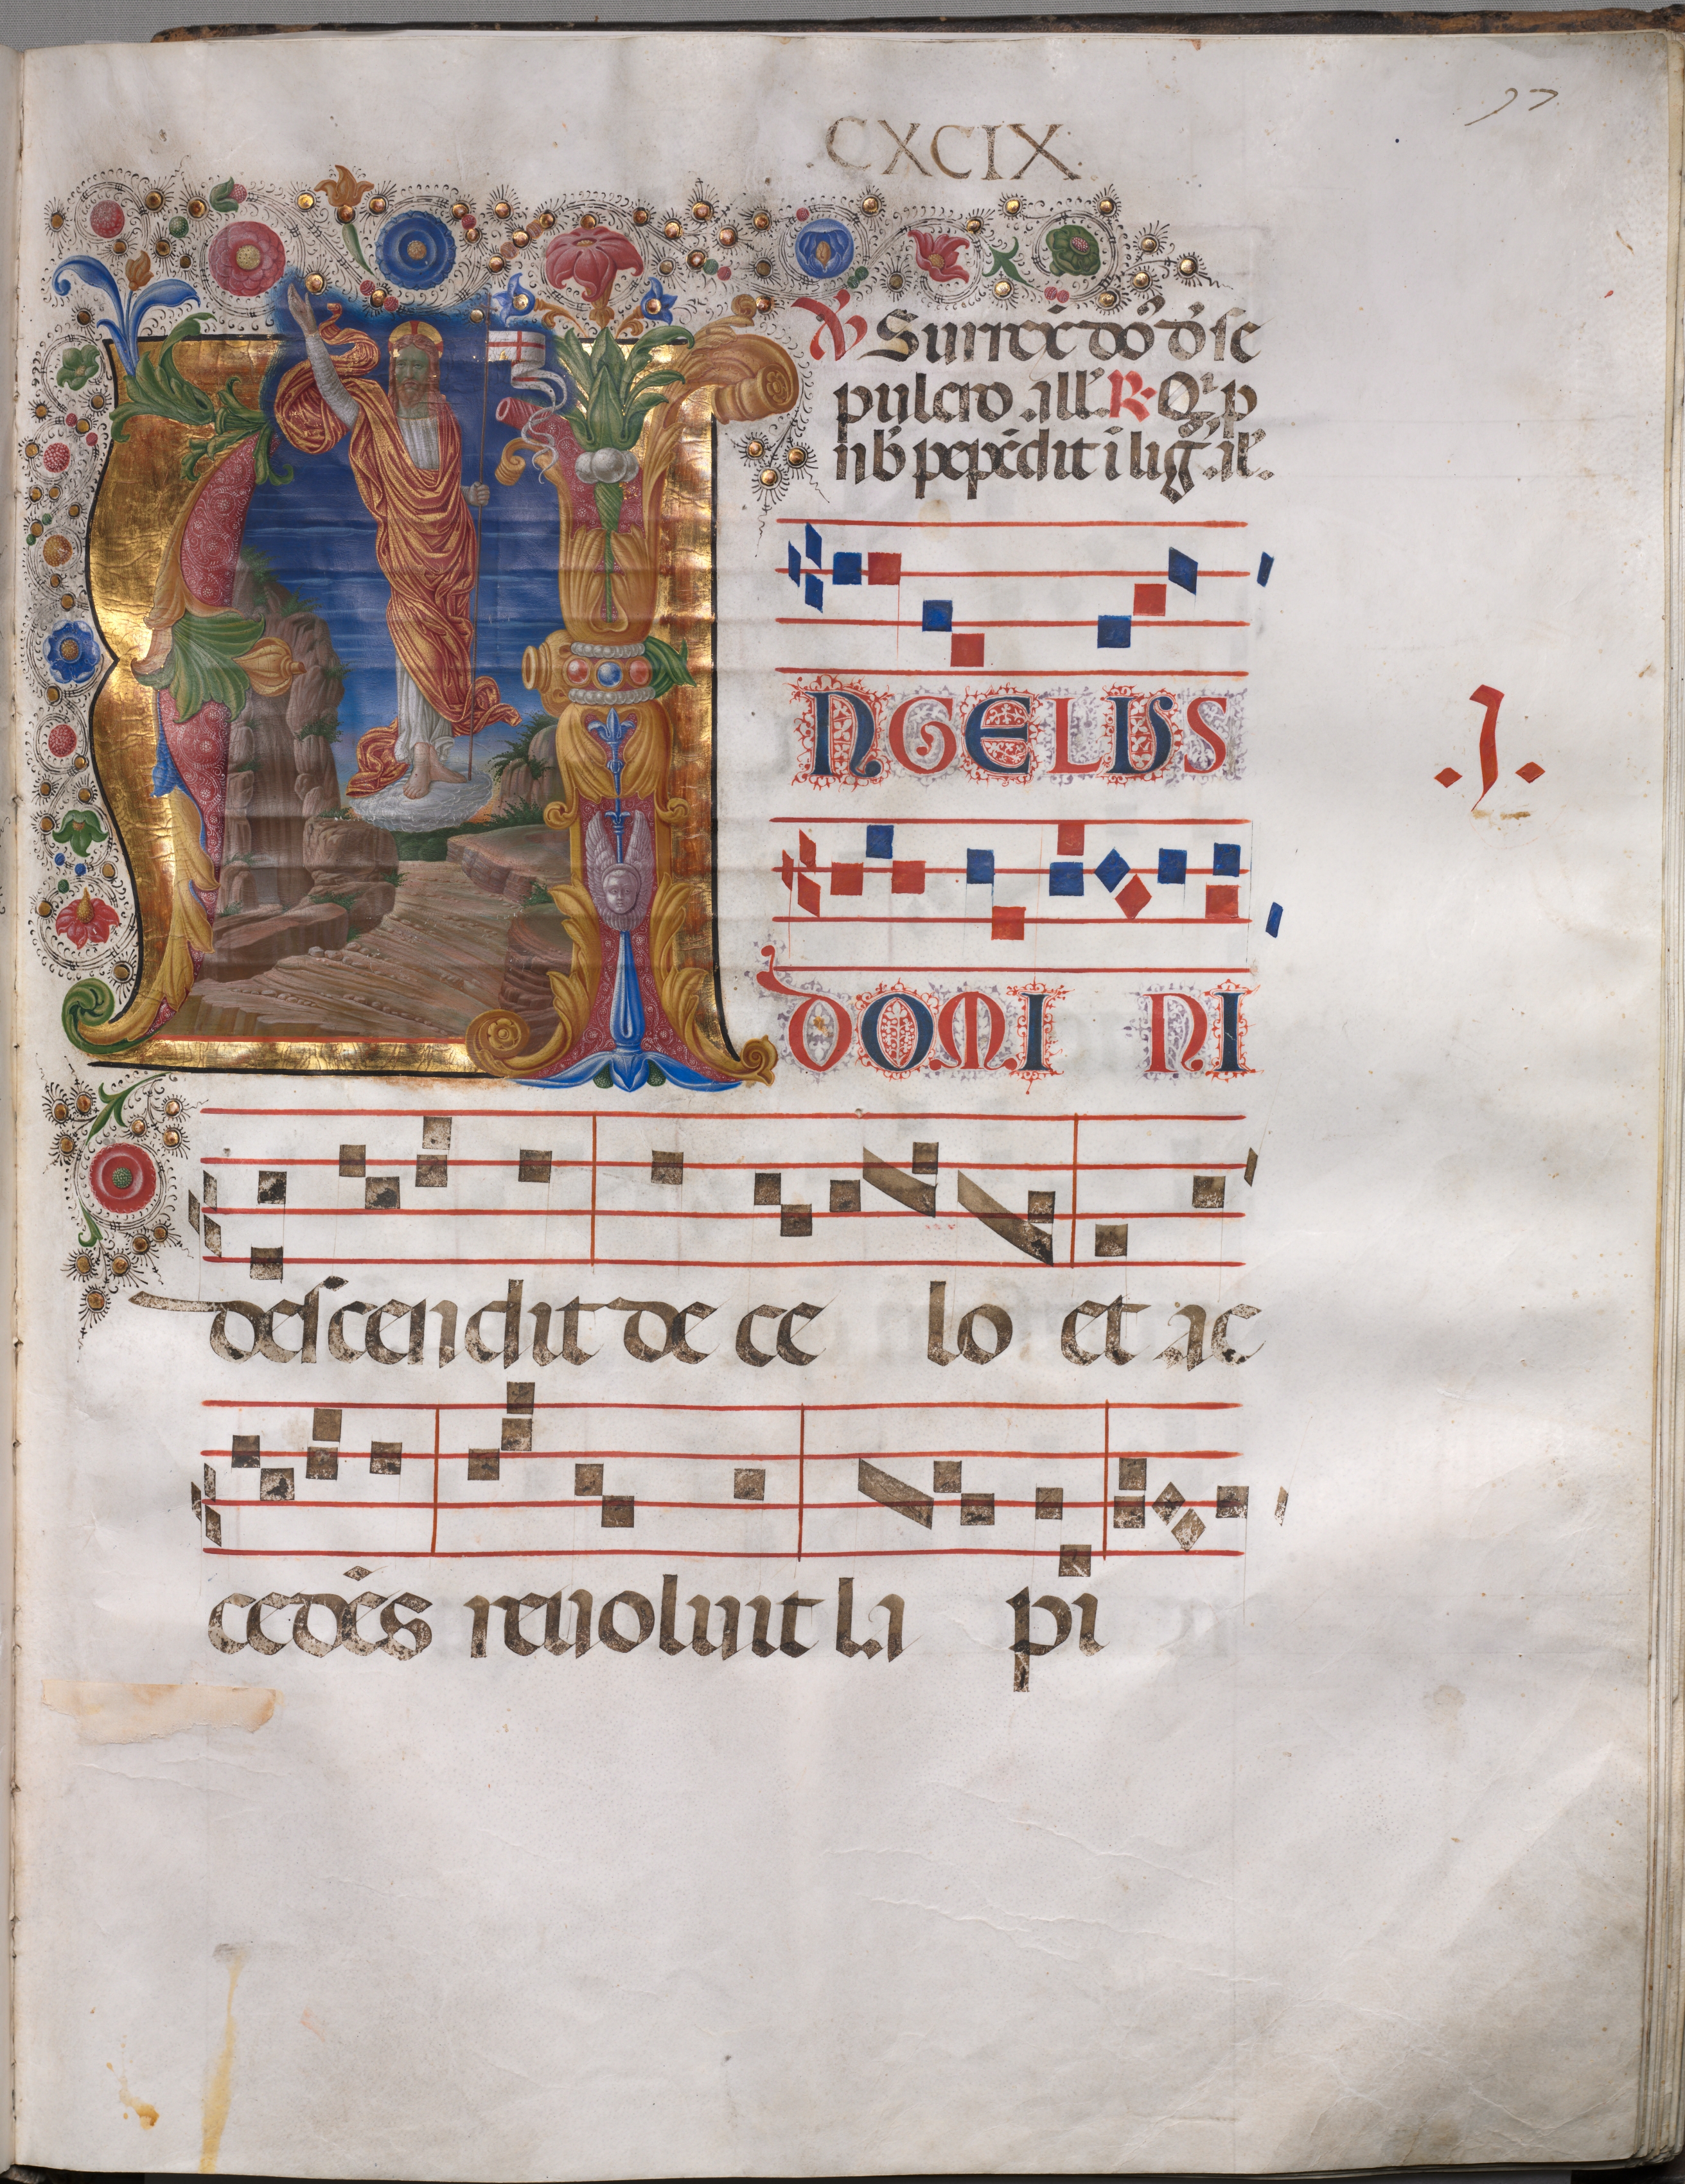 Antiphonary: Initial A, Resurrection